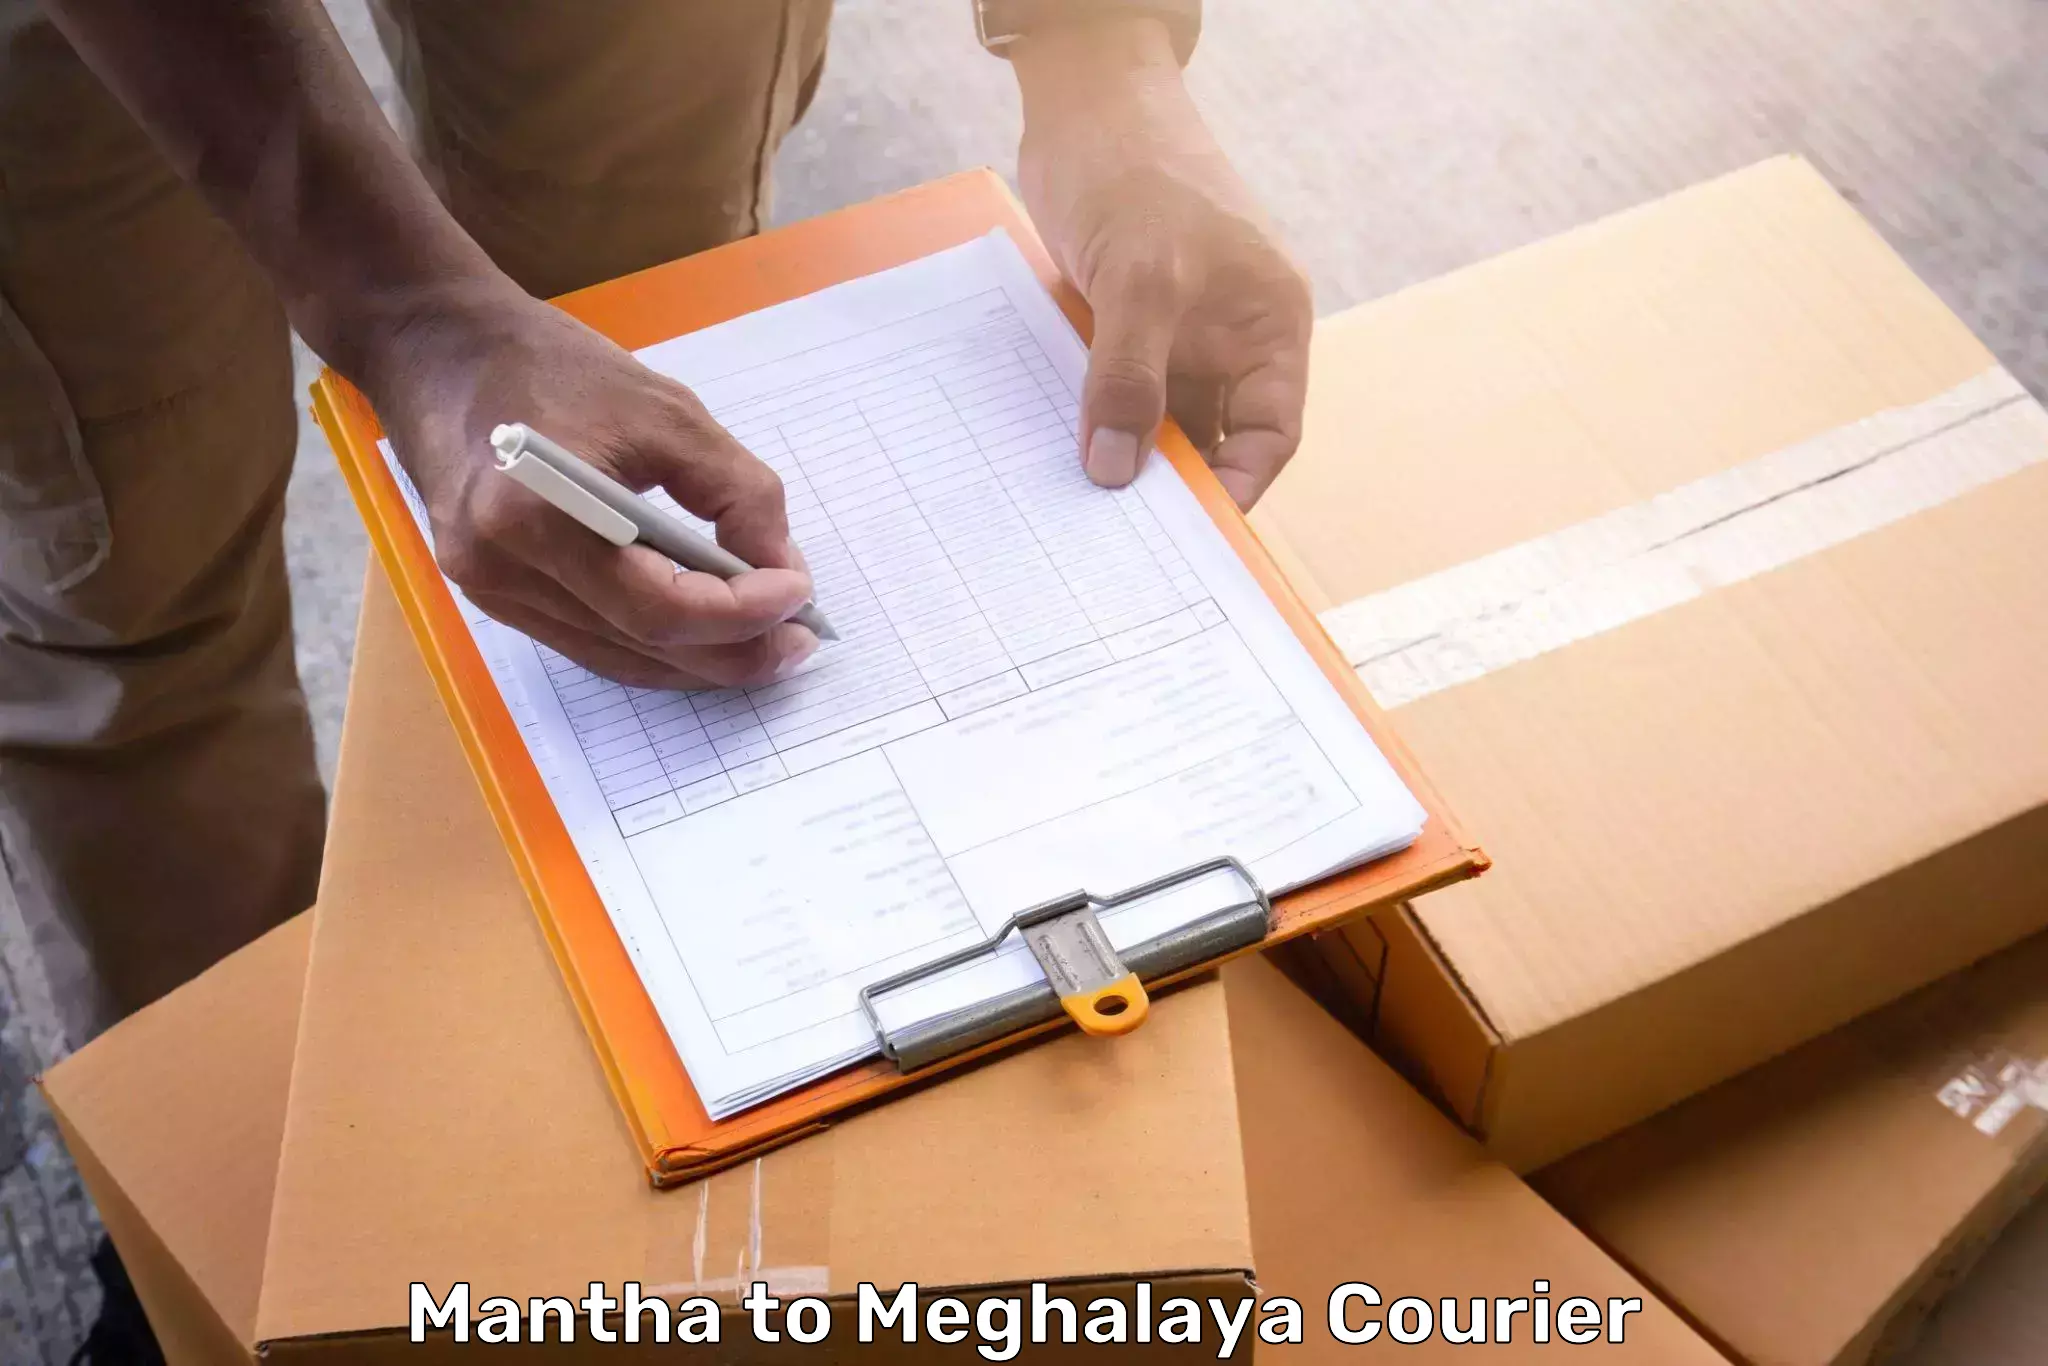 Door to door luggage delivery in Mantha to Meghalaya